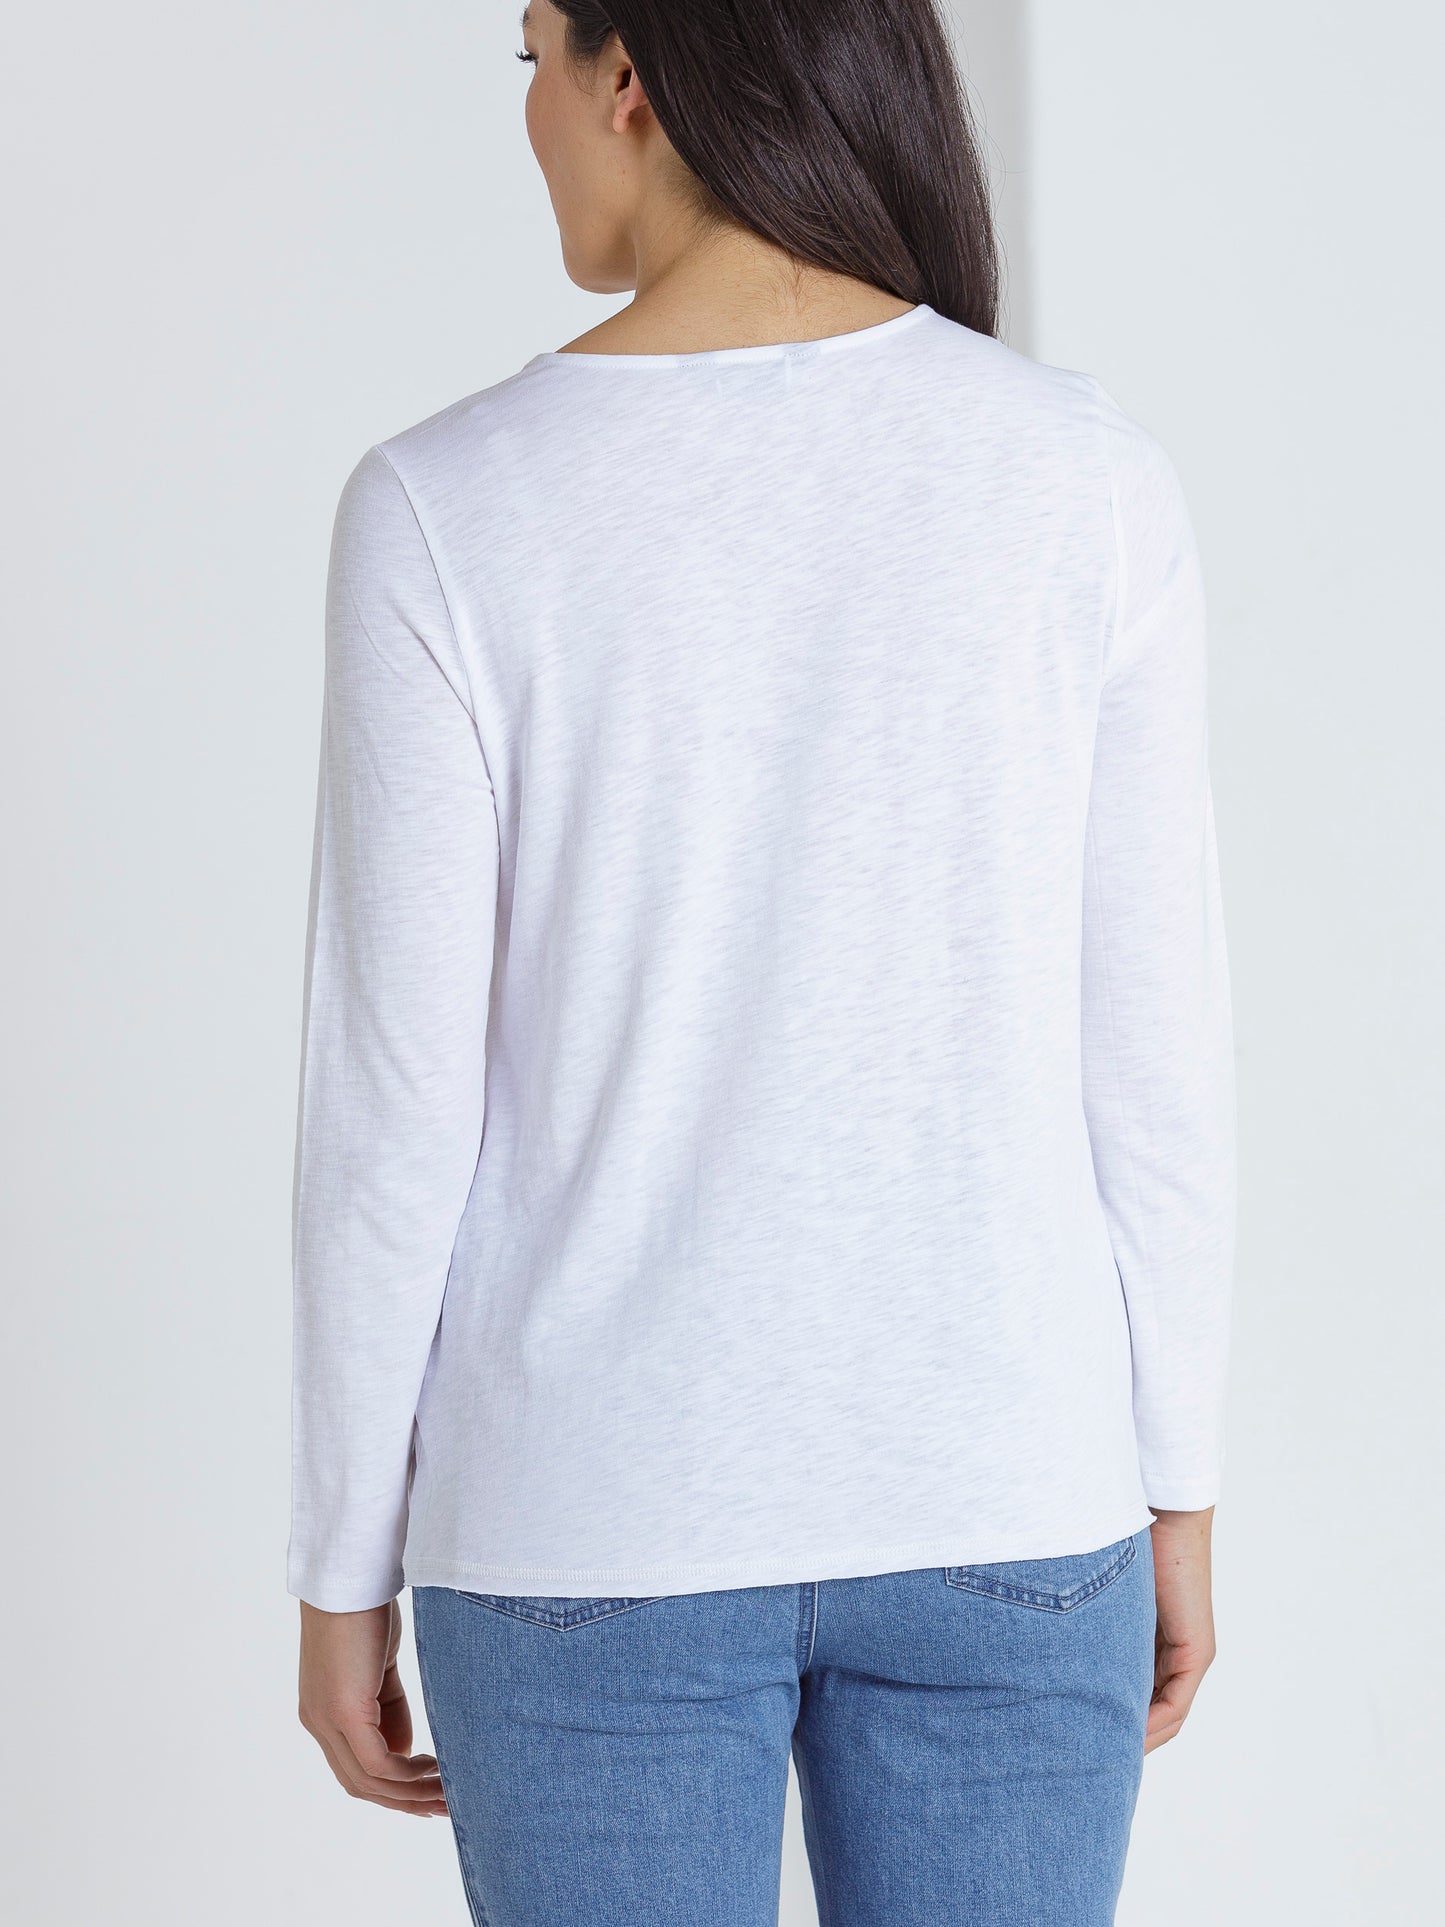 Marco Polo L/S Essential Tee White | MP37378